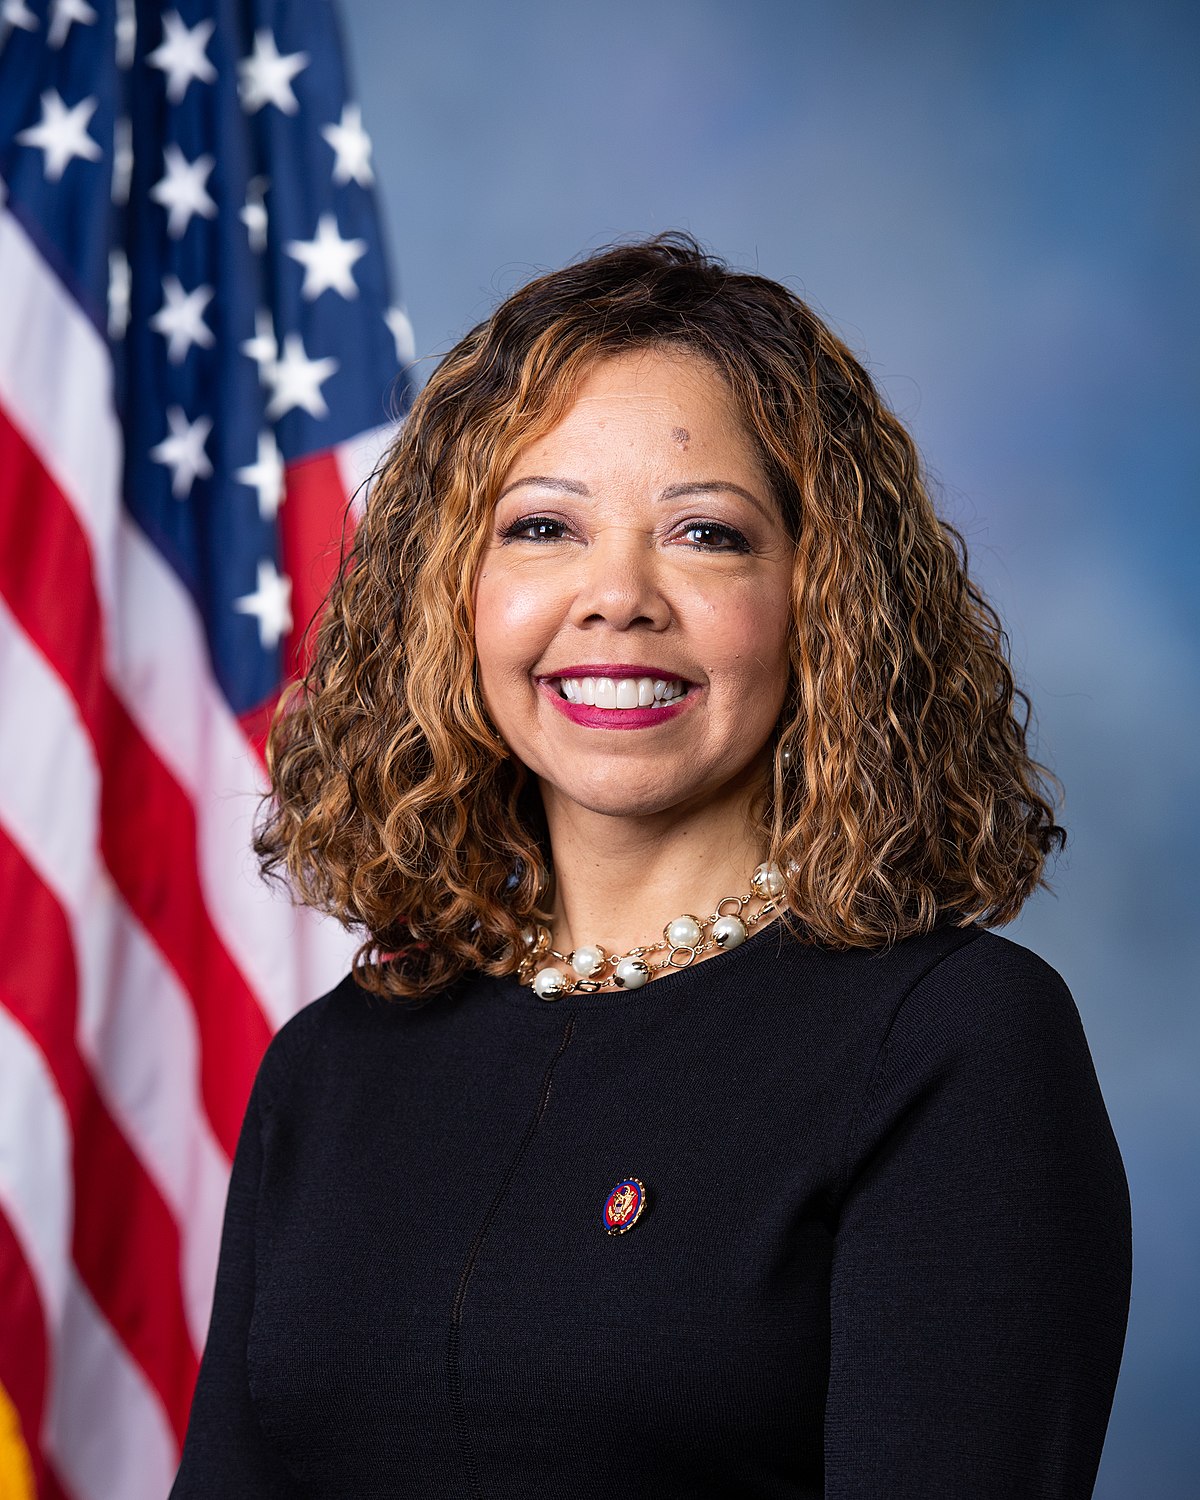 https://upload.wikimedia.org/wikipedia/commons/thumb/d/d6/Lucy_McBath%2C_official_portrait%2C_116th_Congress.jpg/1200px-Lucy_McBath%2C_official_portrait%2C_116th_Congress.jpg